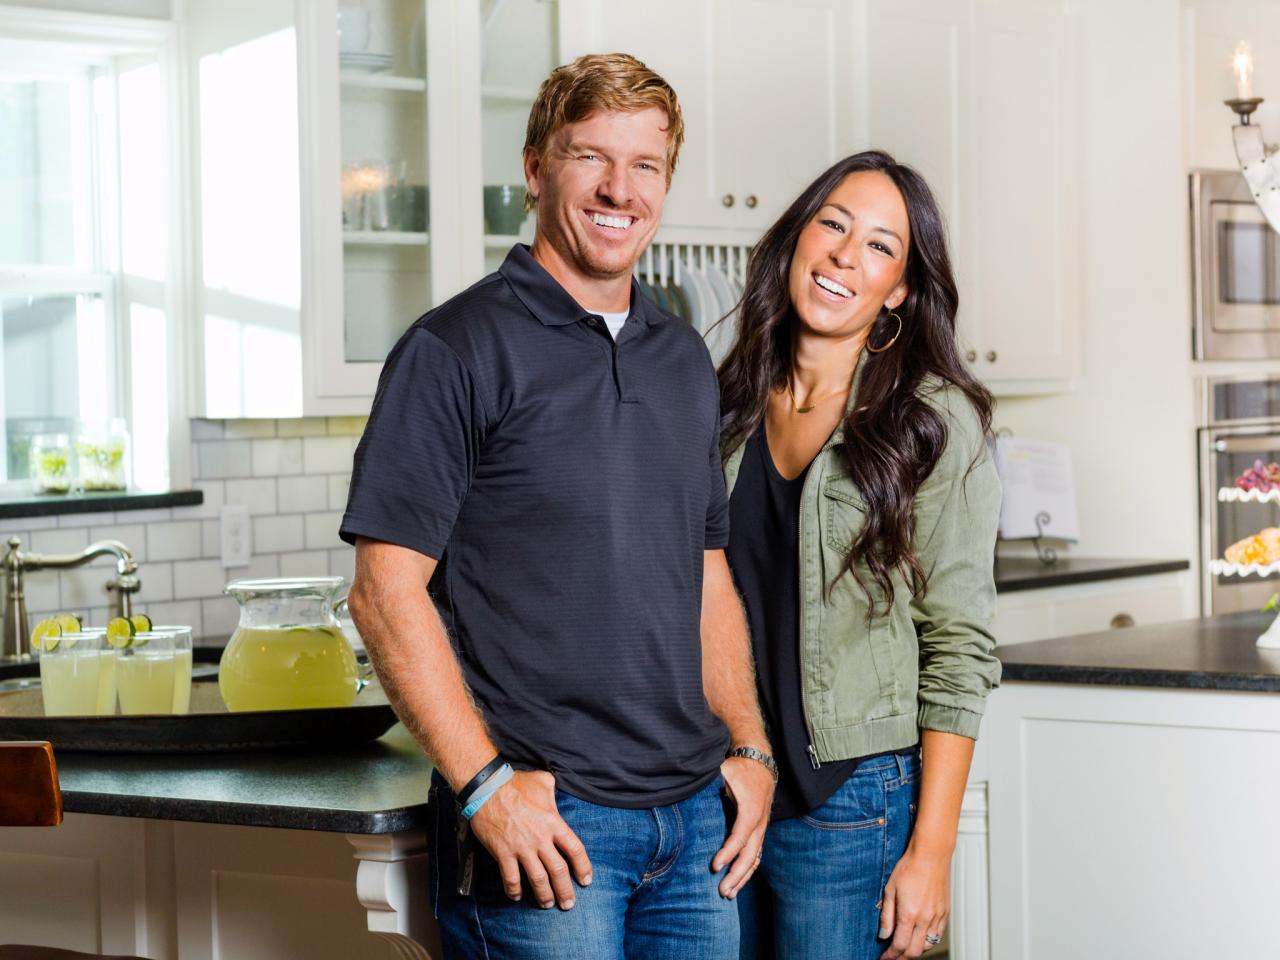 25 Fixer Upper-Inspired Design Tricks To Live By